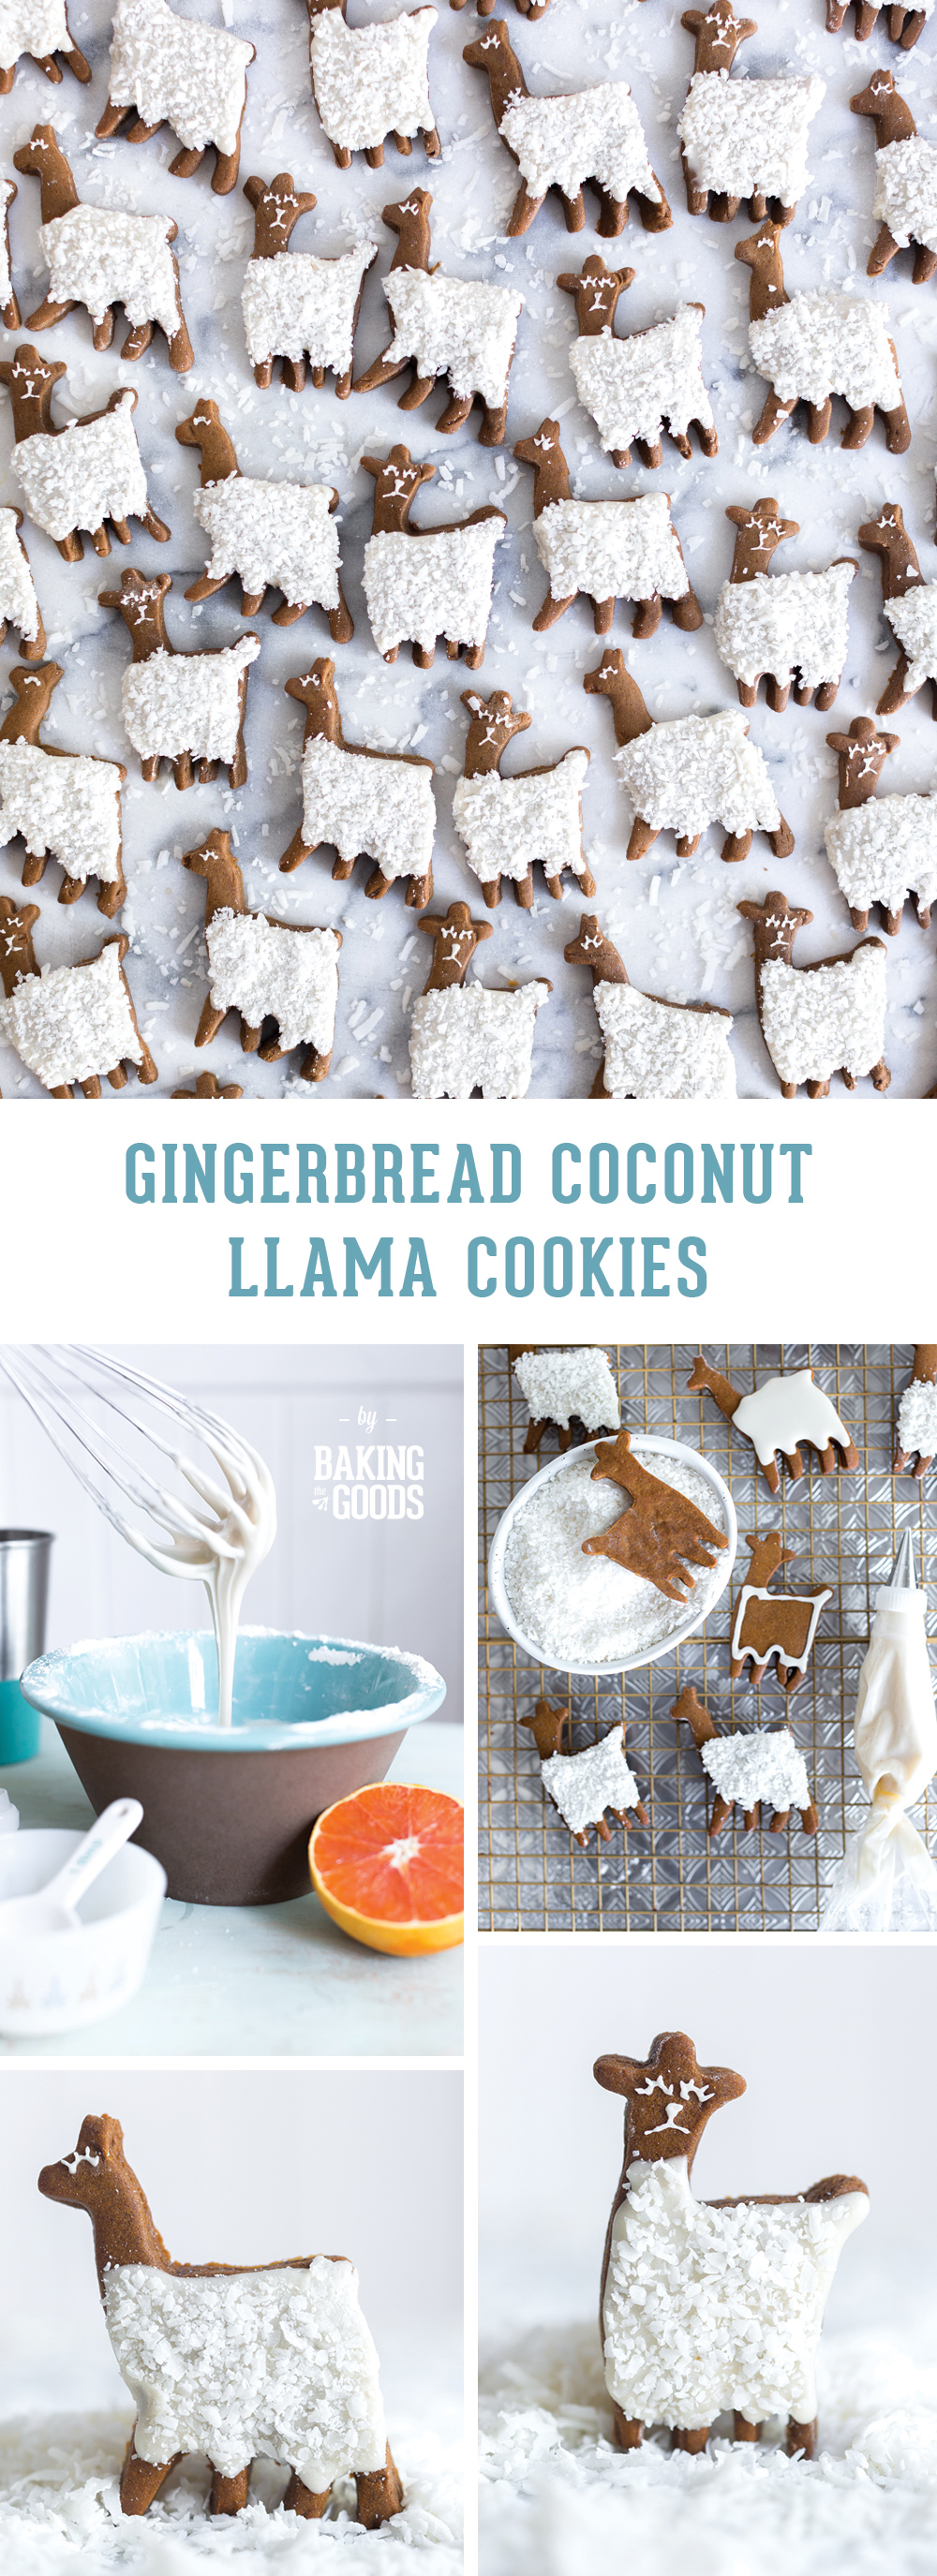 Gingerbread Coconut Llama Cookies by Baking The Goods